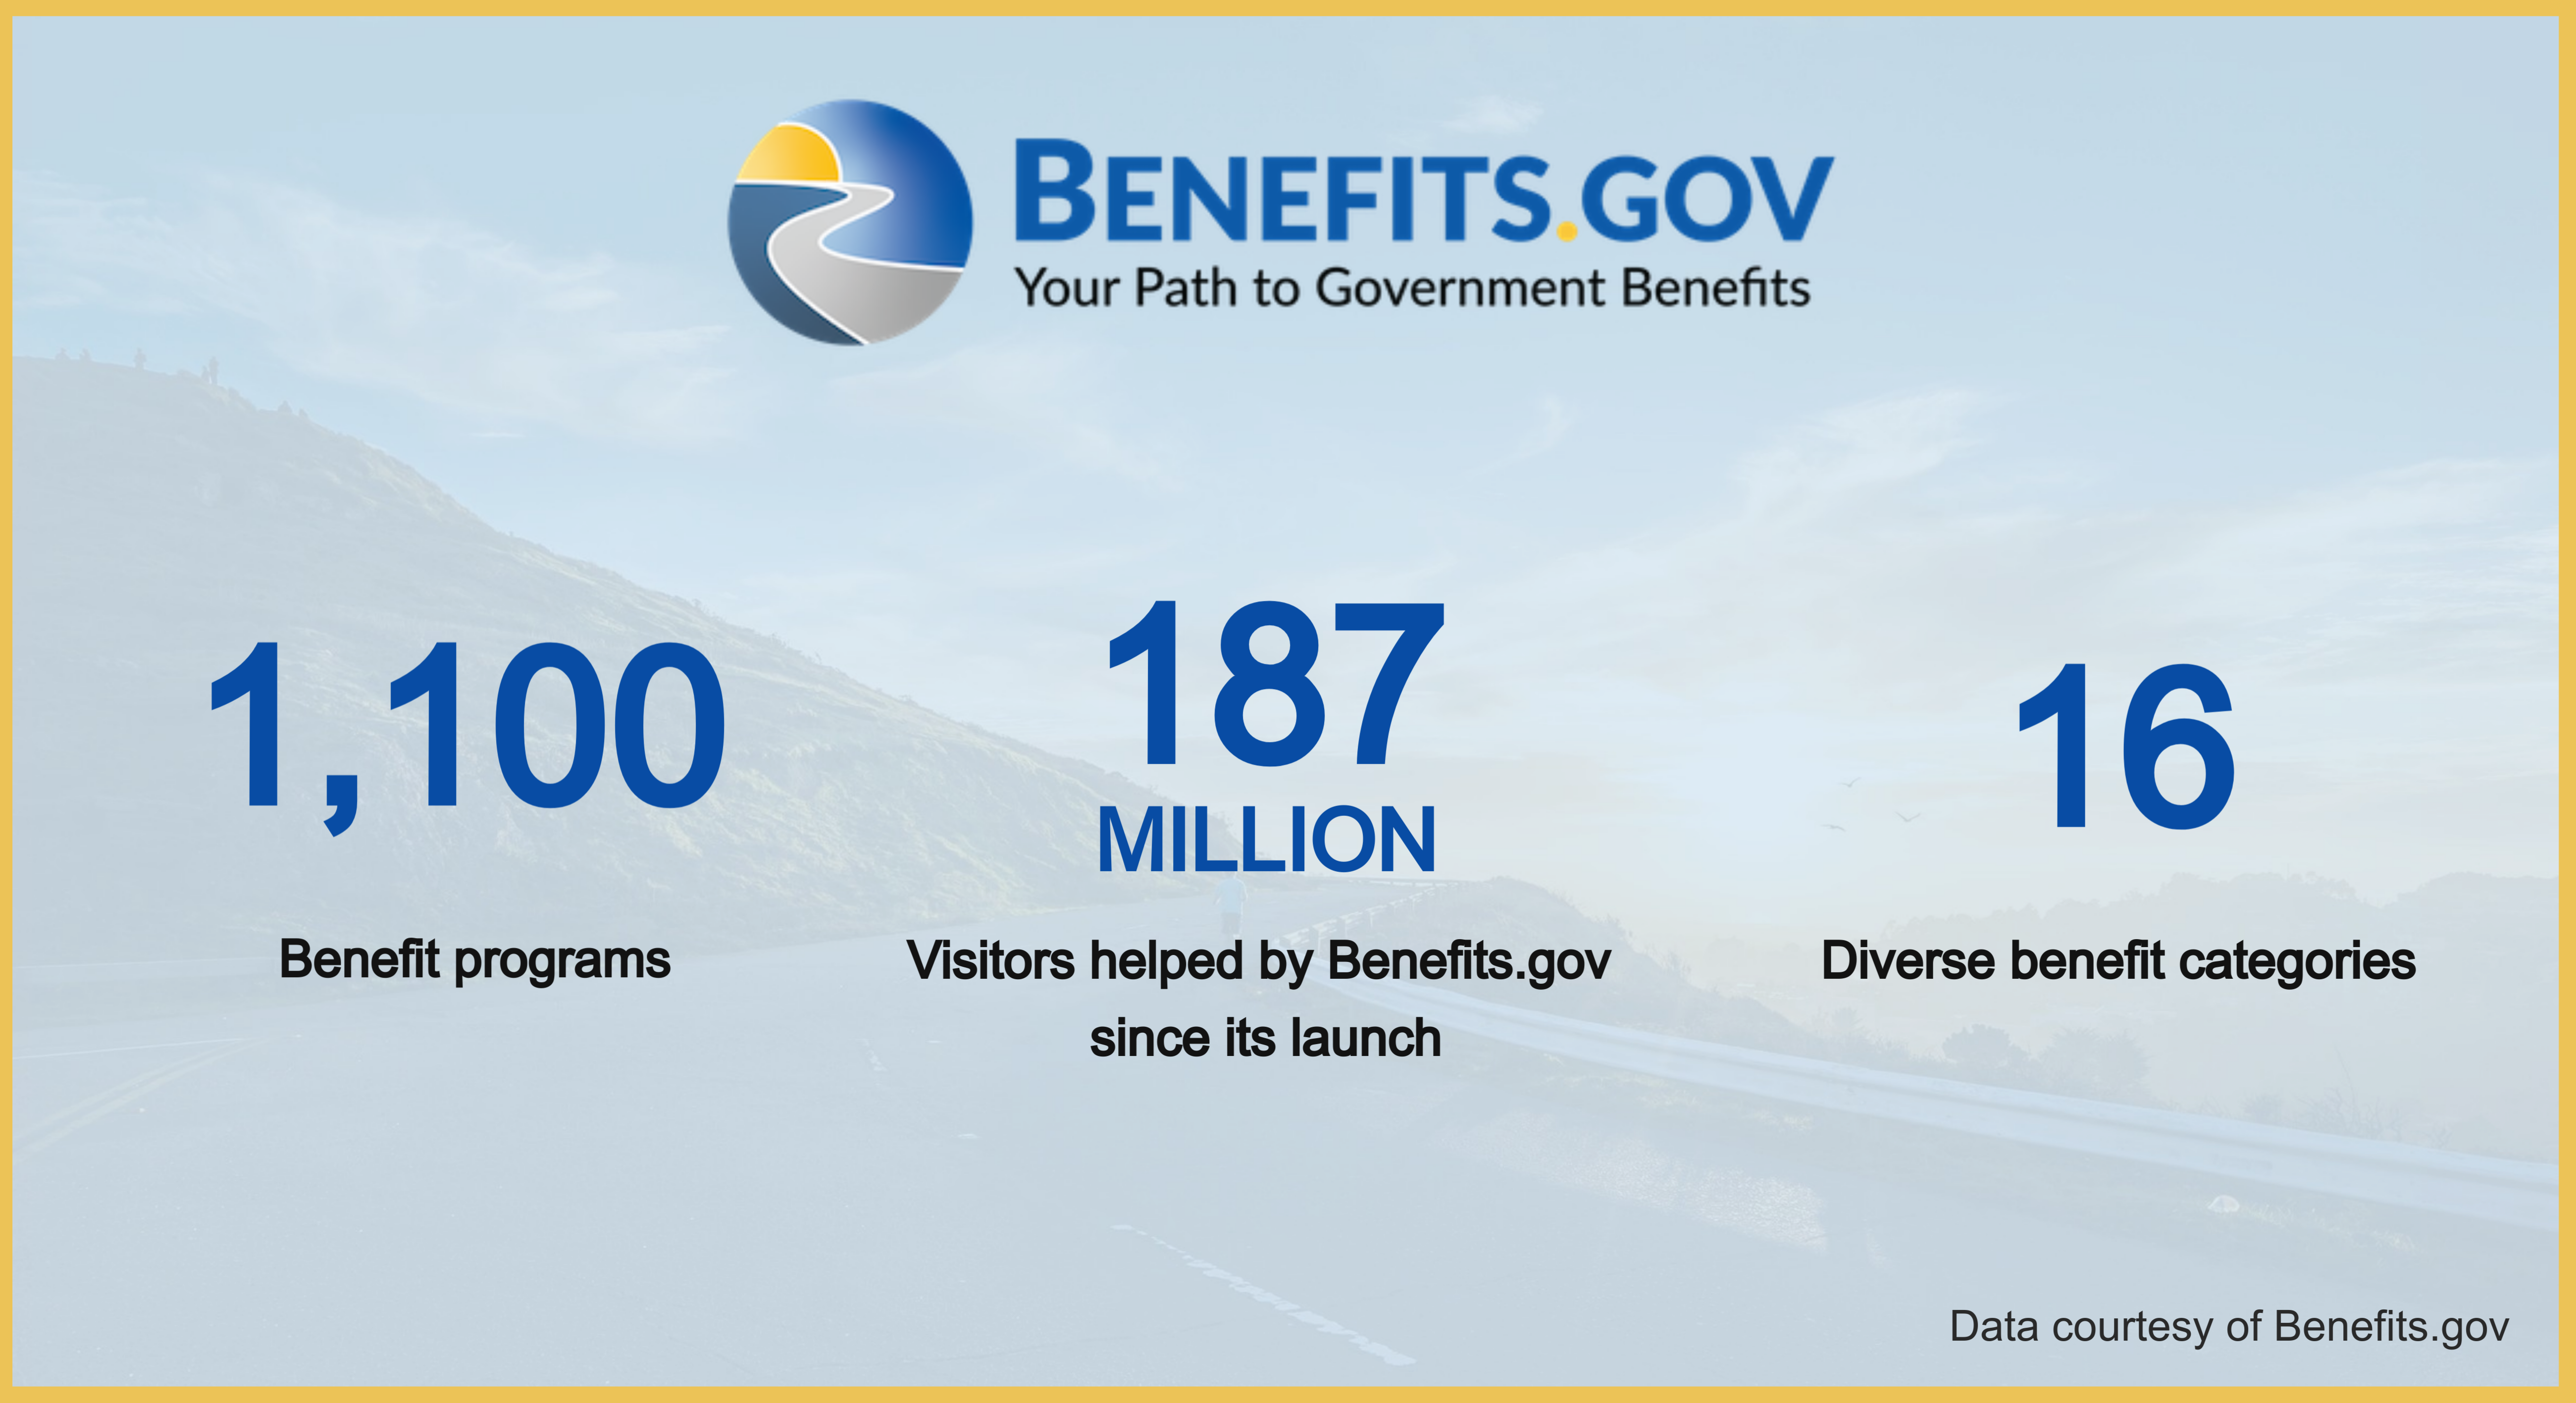 Benefits.gov. Your Path to Government Benefits.